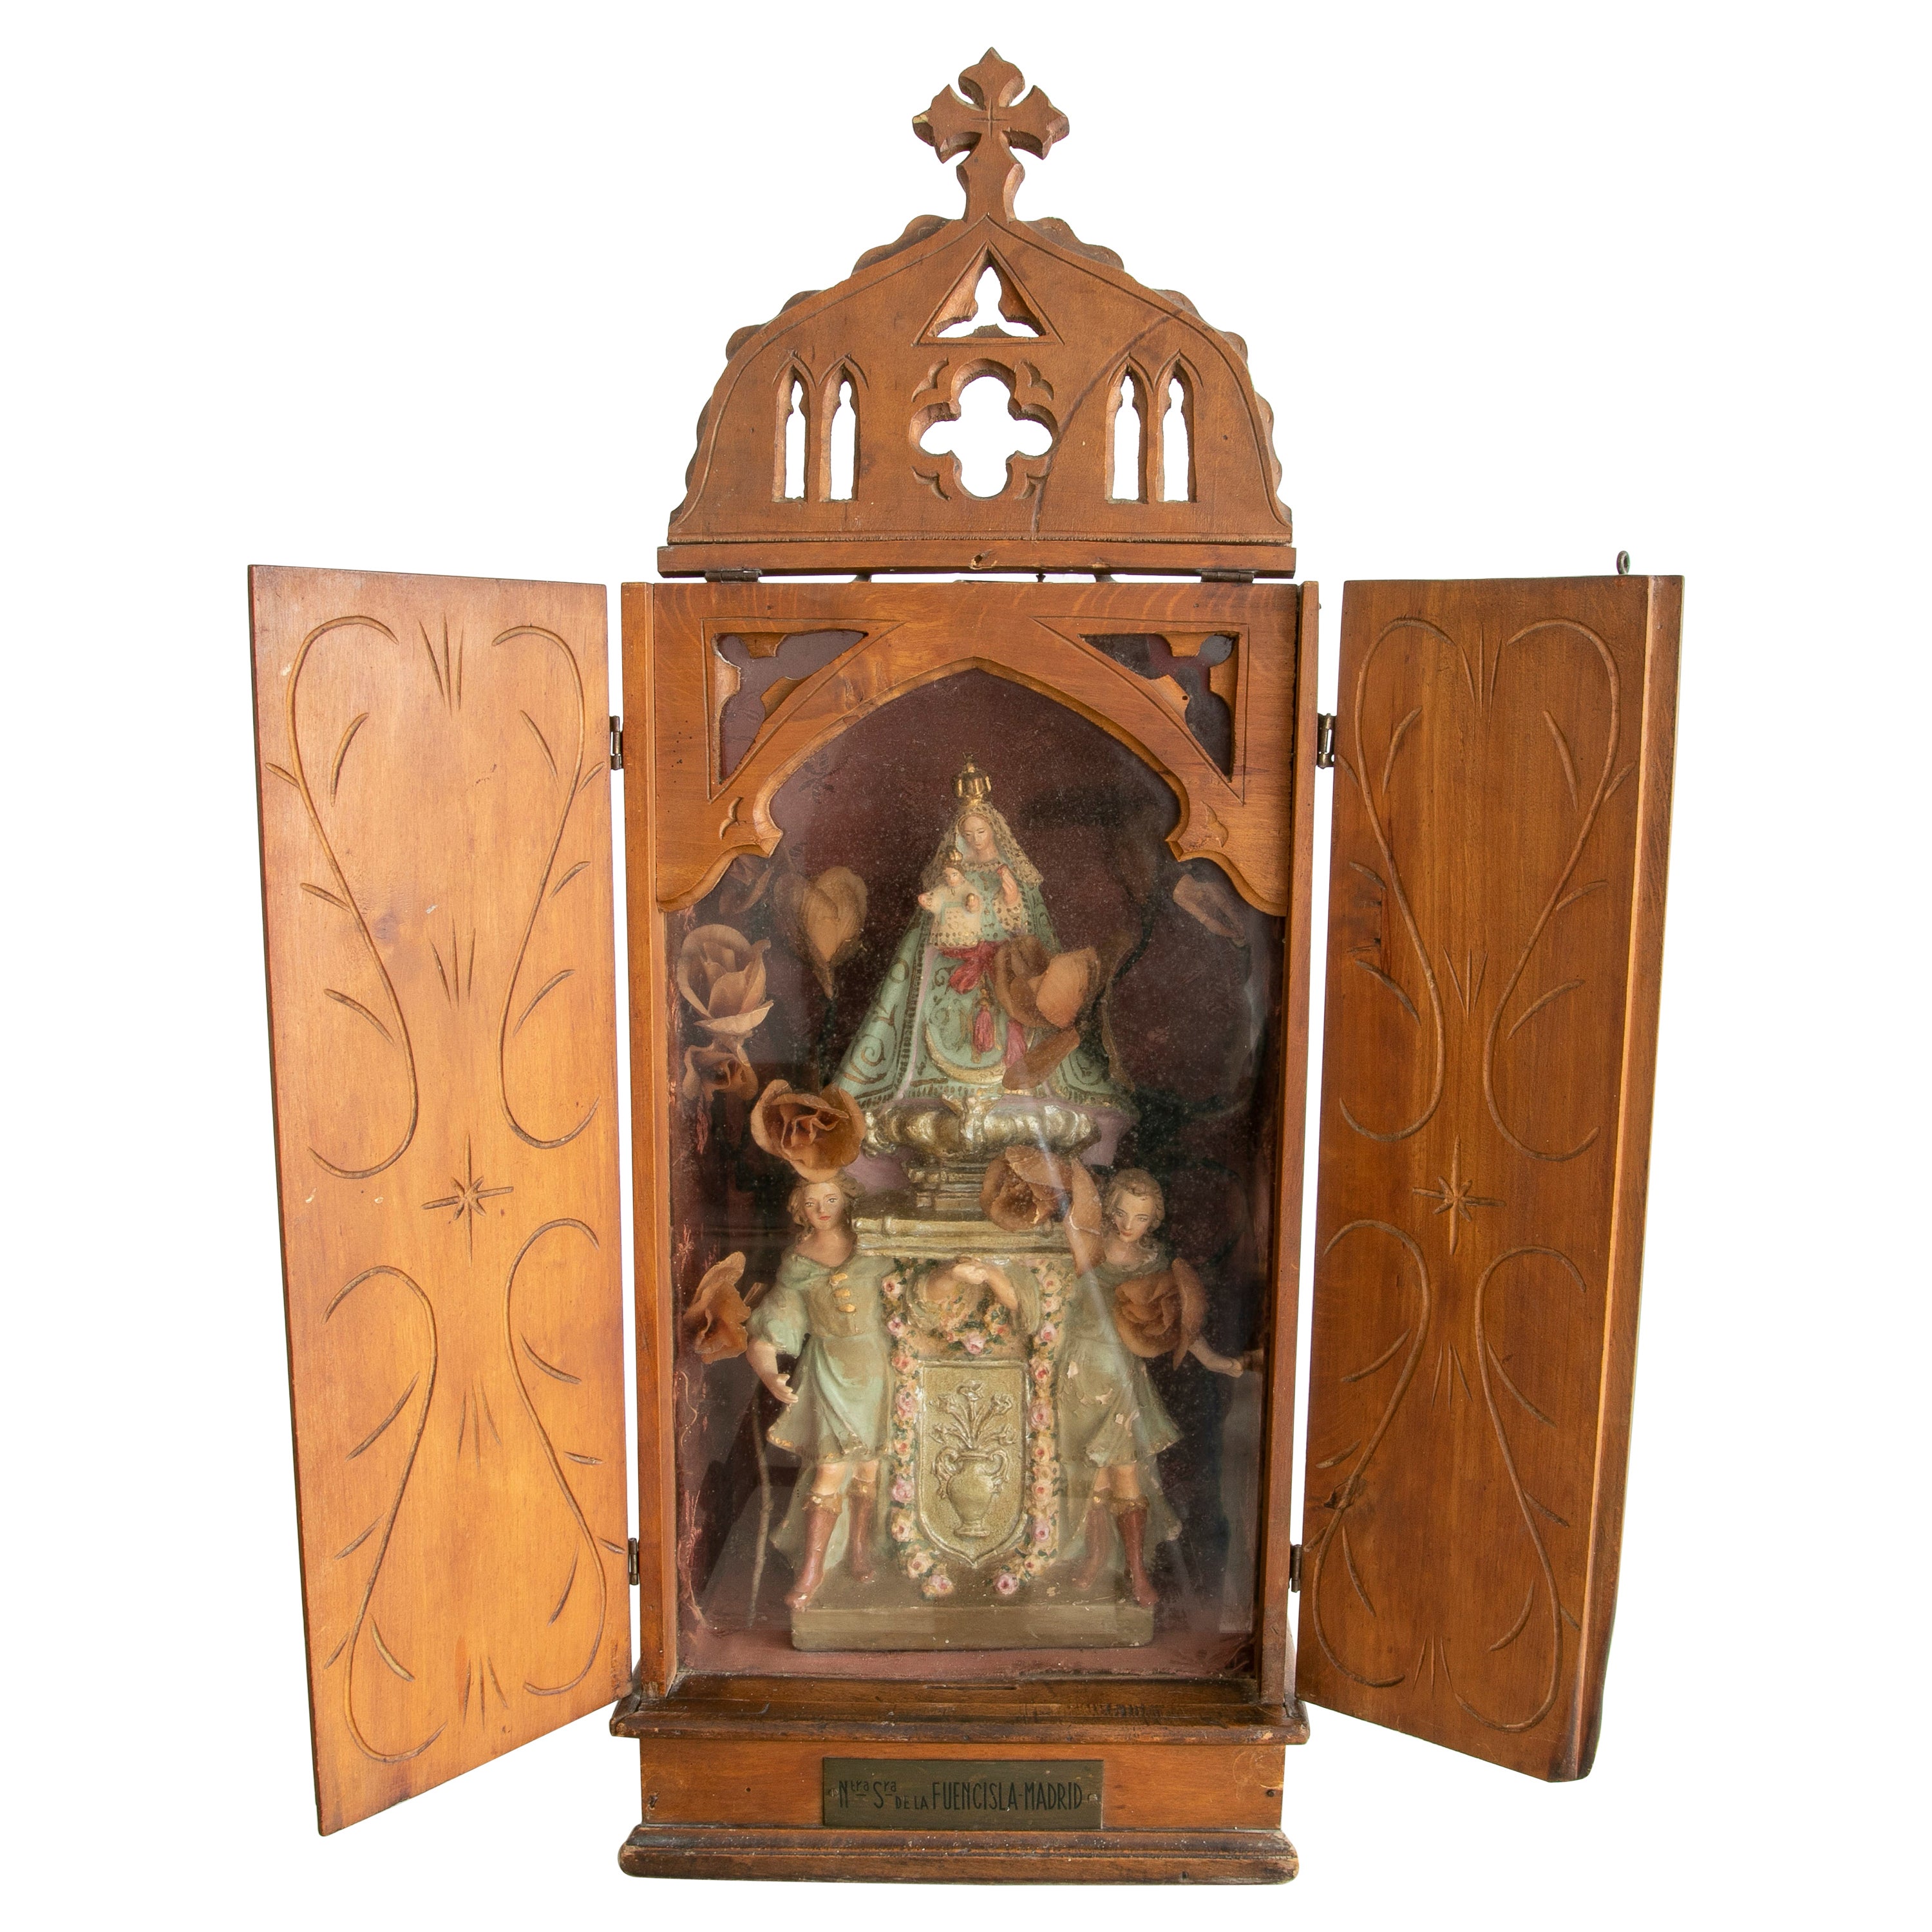  Late 19th Century Spanish Terracotta Fuencisla Virgin in its Own Wooden Box For Sale